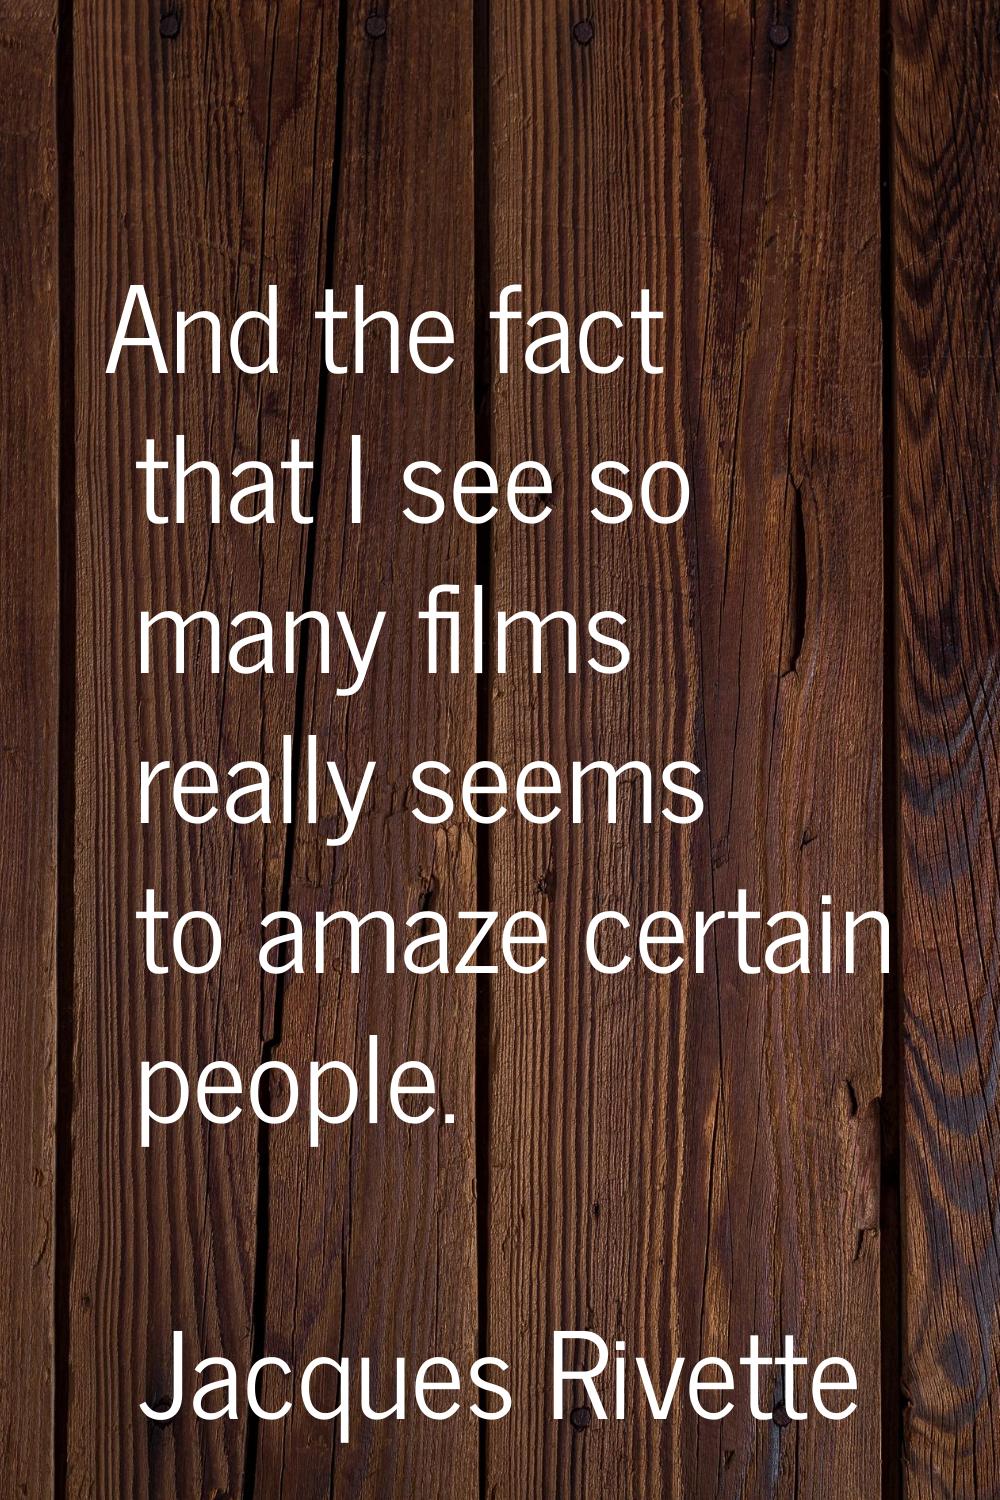 And the fact that I see so many films really seems to amaze certain people.